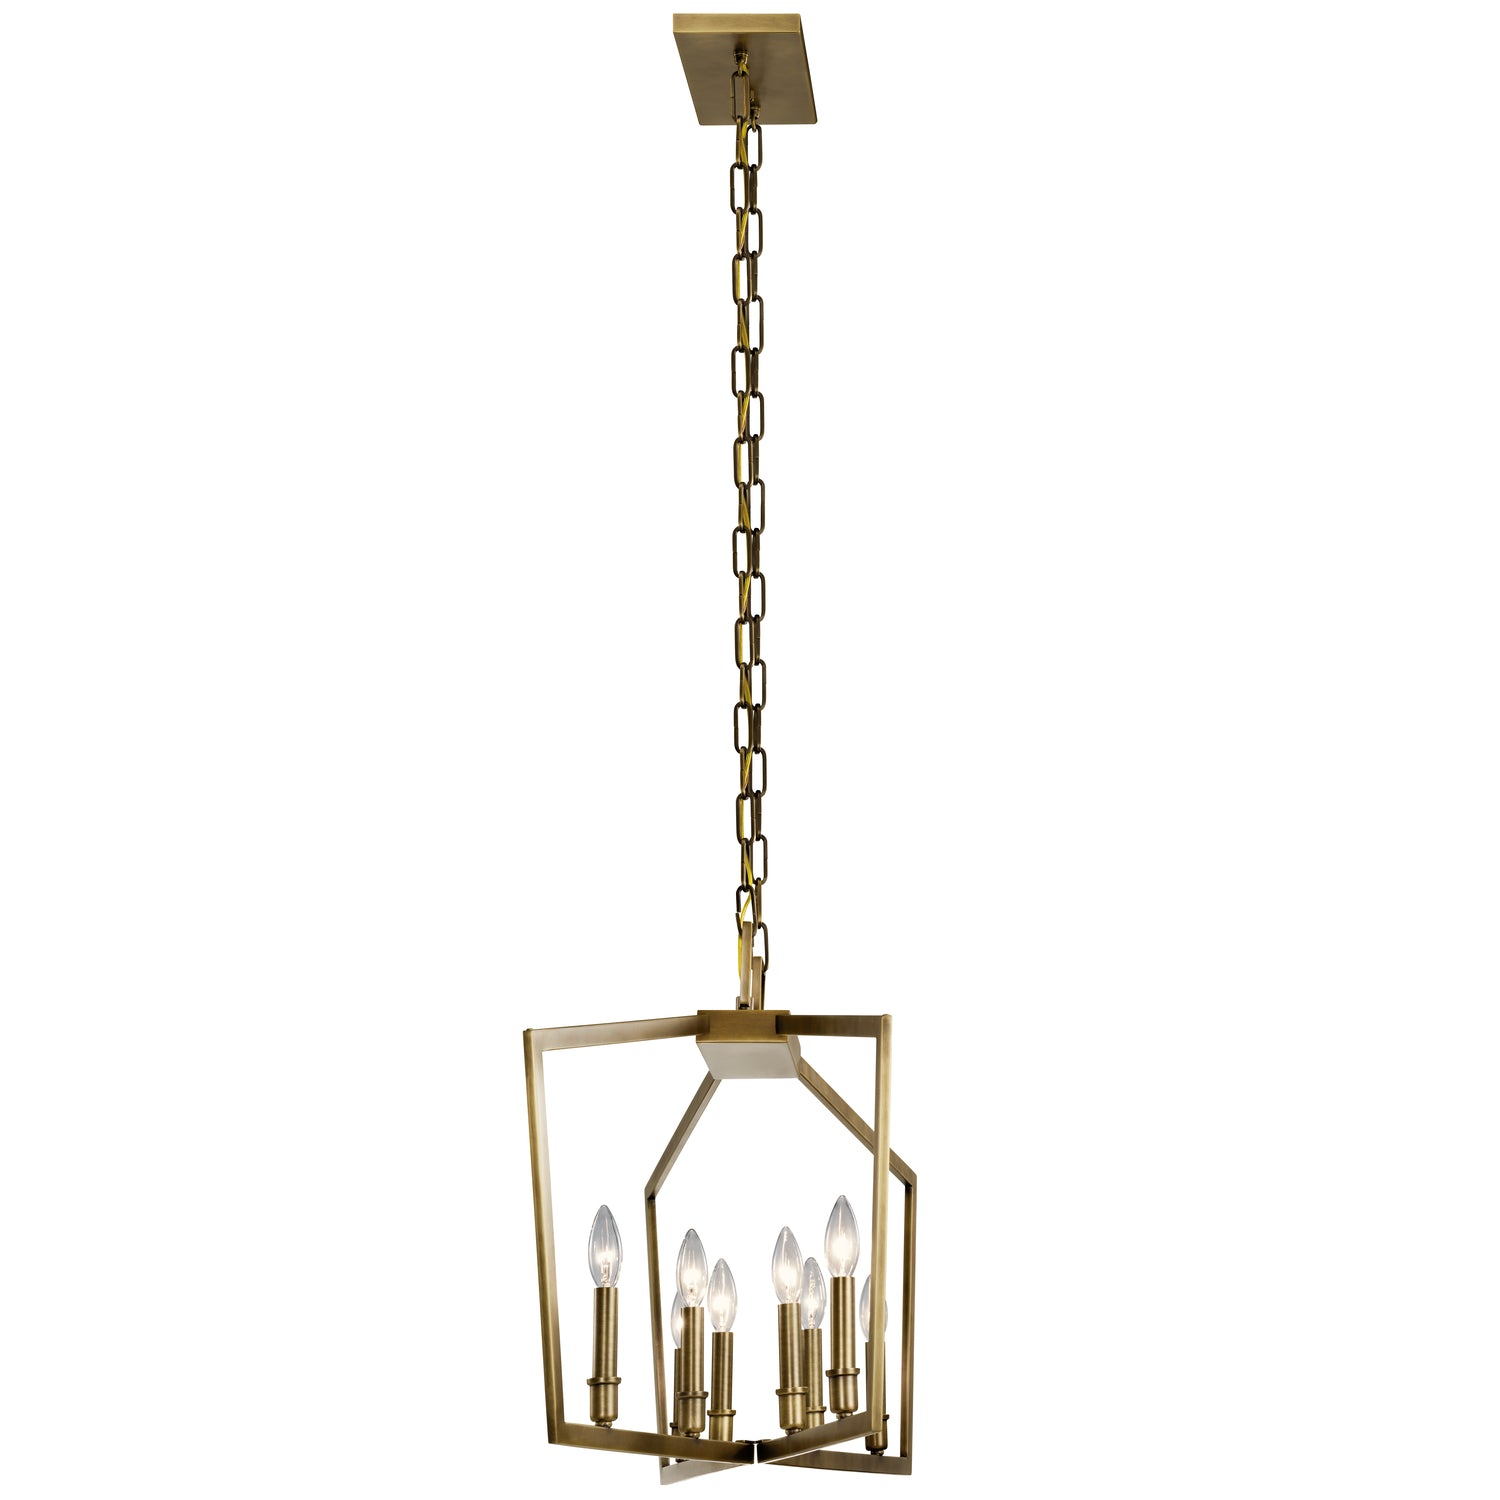 Abbotswell Linear Suspension Natural Brass